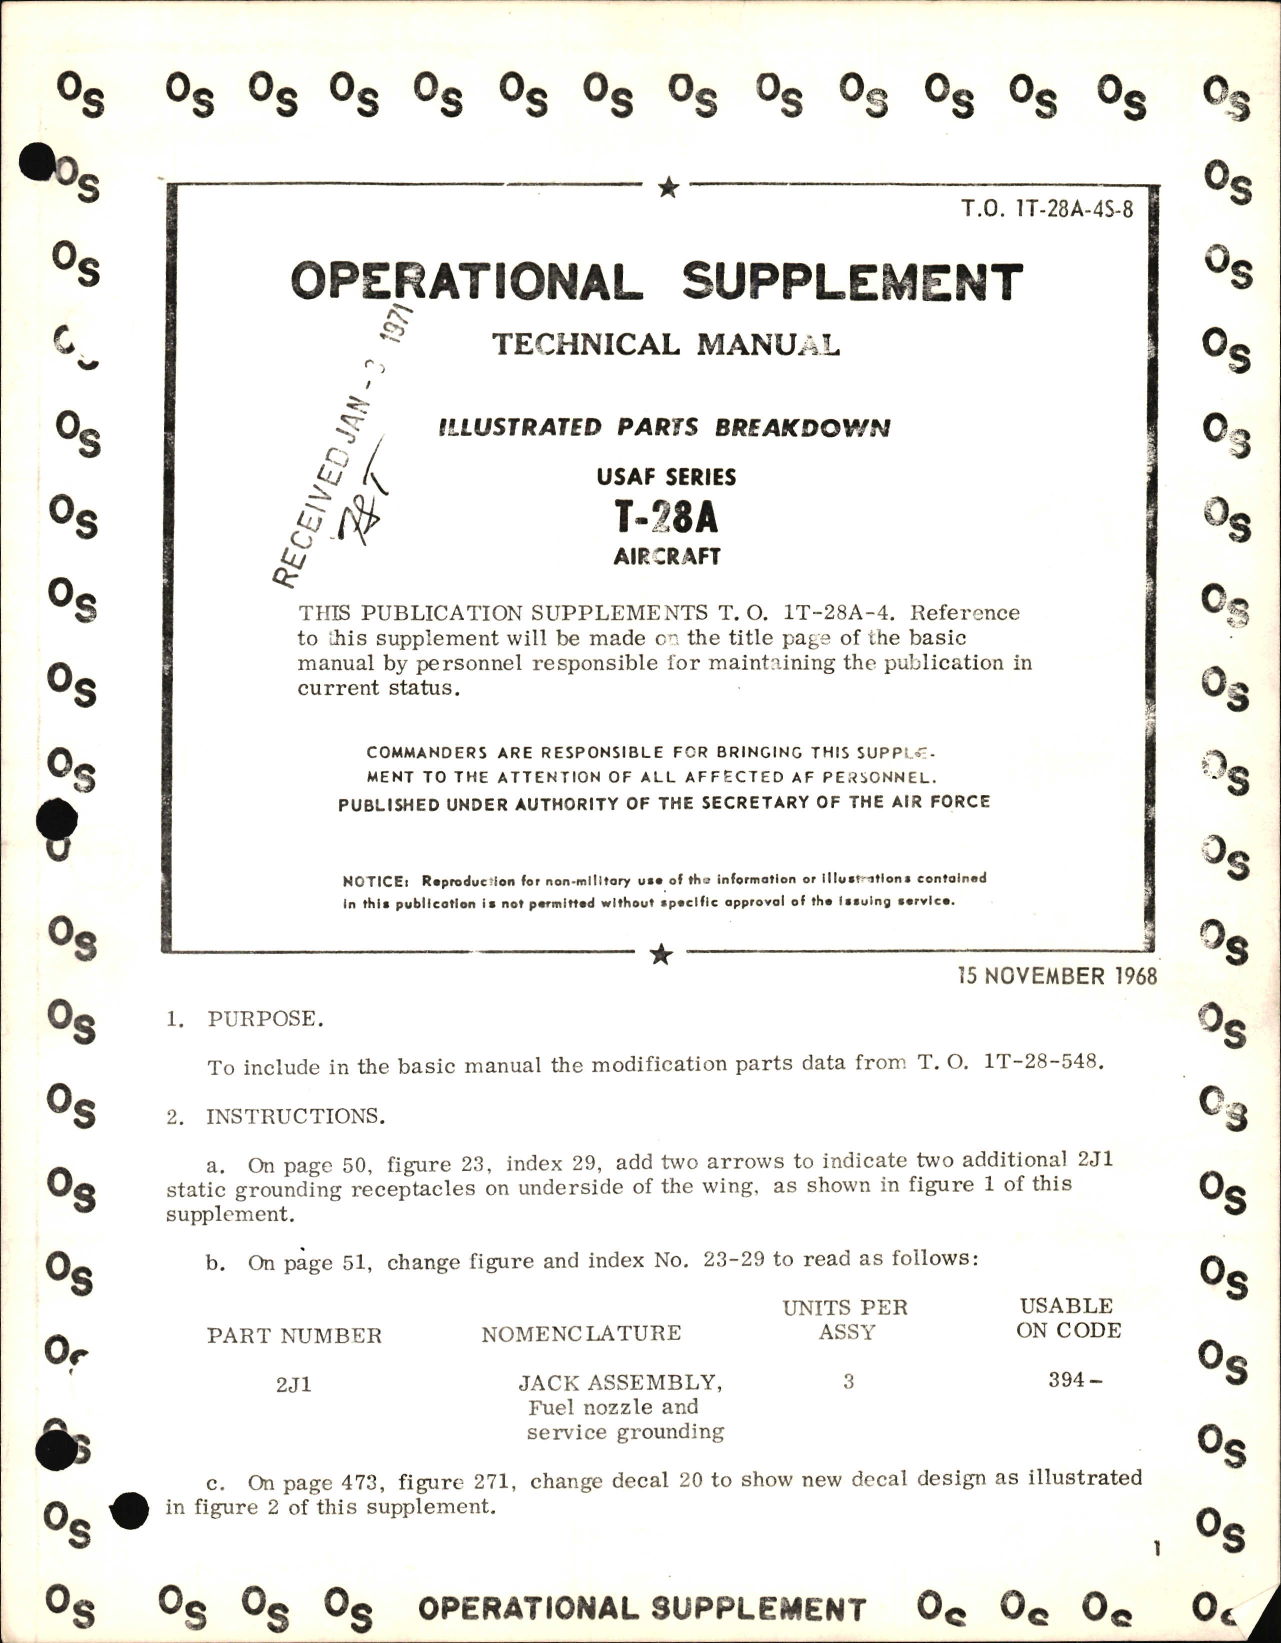 Sample page 1 from AirCorps Library document: Illustrated Parts Breakdown for T-28A - Operational Supplement